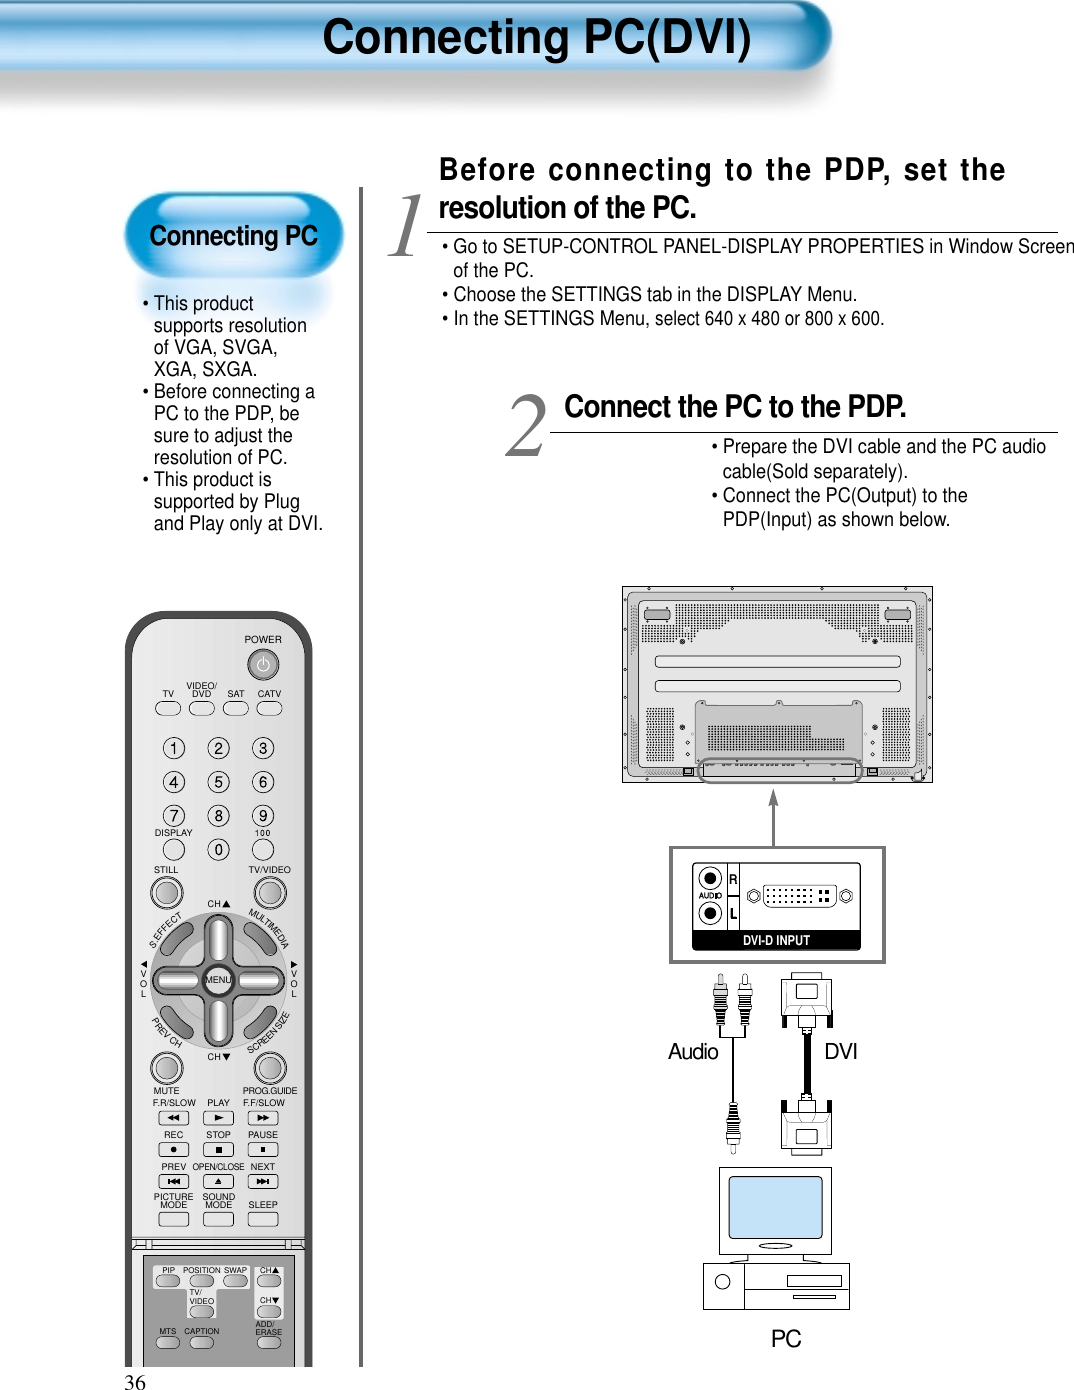 Connecting PC• This productsupports resolutionof VGA, SVGA,XGA, SXGA.• Before connecting aPC to the PDP, besure to adjust theresolution of PC.• This product issupported by Plugand Play only at DVI.Connecting PC(DVI)36VIDEO/DVD SATTV CATVDISPLAYTV/VIDEOSTILLCHCHVOLVOLMULTIMEDIAS.EFFECTMENUPREVCHSCREENSIZEMUTE PROG.GUIDEF.F/SLOWPLAYF.R/SLOWREC STOP PAUSEPREVOPEN/CLOSENEXTPICTUREMODE SOUNDMODE SLEEPPOWERMTS CAPTIONPIP POSITION SWAPTV/VIDEOADD/ERASECHCHConnect the PC to the PDP.• Prepare the DVI cable and the PC audiocable(Sold separately).• Connect the PC(Output) to thePDP(Input) as shown below. 2Before connecting to the PDP, set theresolution of the PC.• Go to SETUP-CONTROL PANEL-DISPLAY PROPERTIES in Window Screenof the PC.• Choose the SETTINGS tab in the DISPLAY Menu.• In the SETTINGS Menu, select 640 x 480 or 800 x 600.1DVI-D INPUTDVIAudioPC